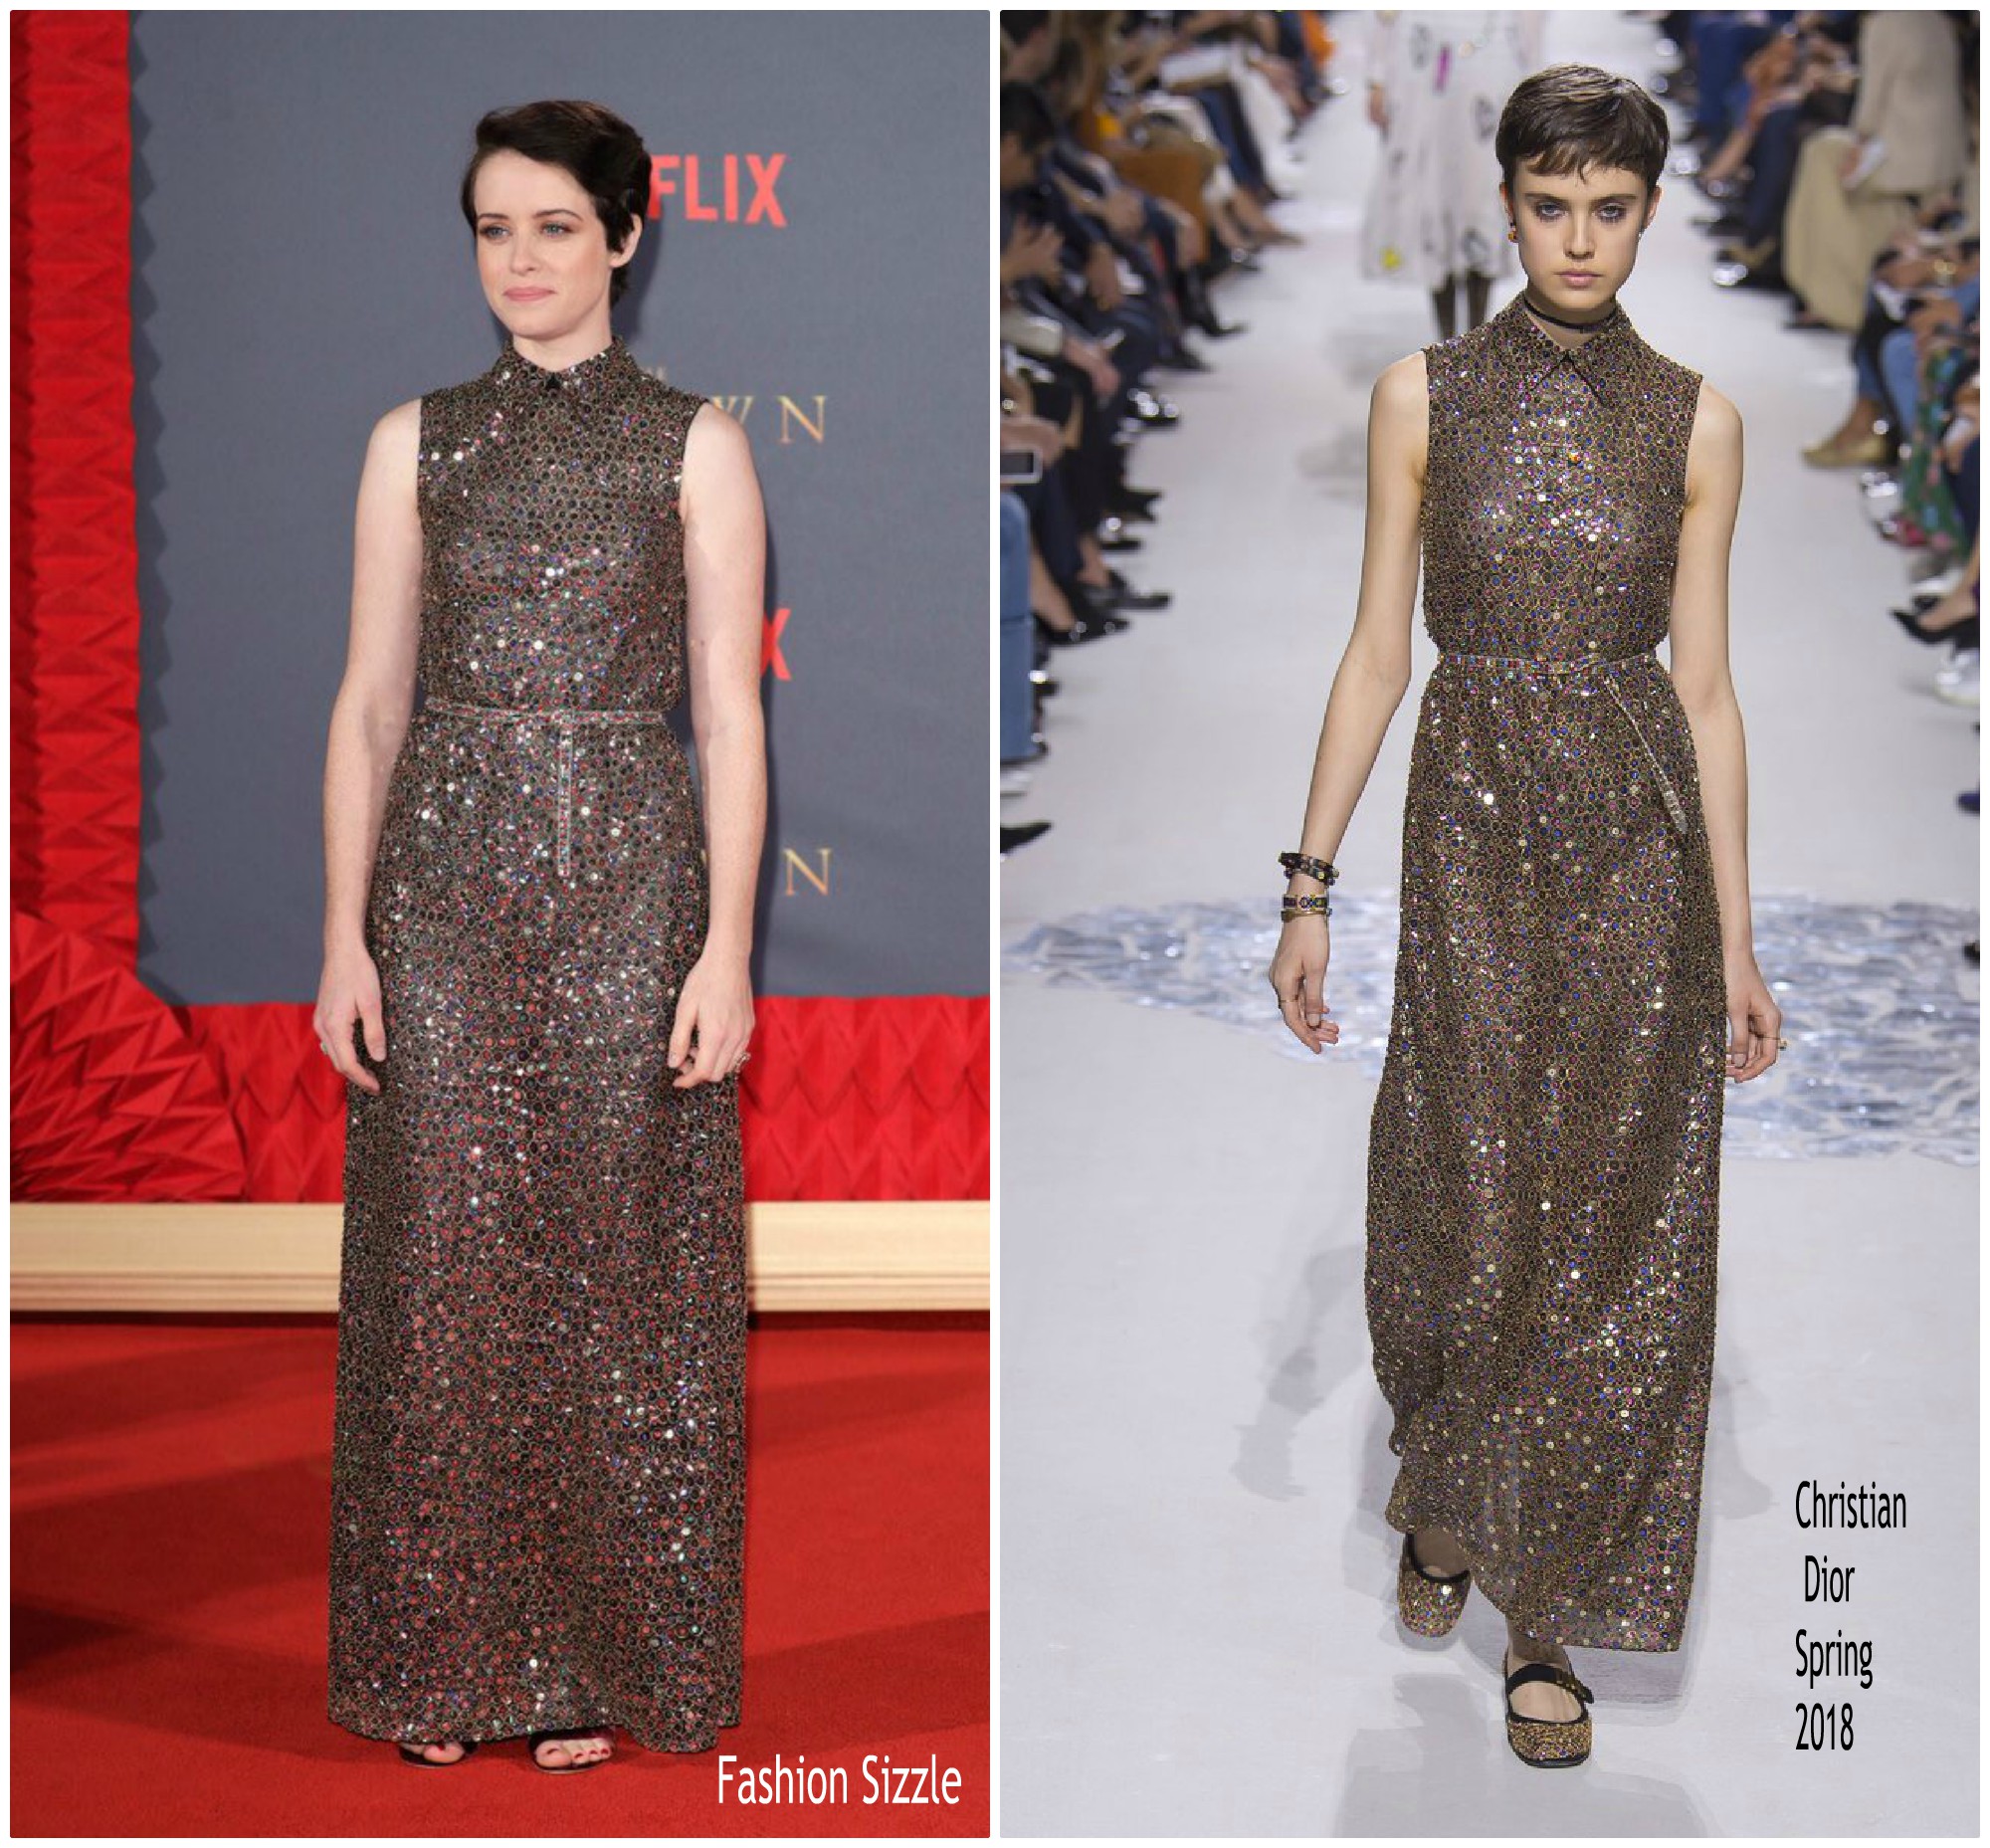 claire-foy-in-christian-dior-the-crown-season-2-london-premiere